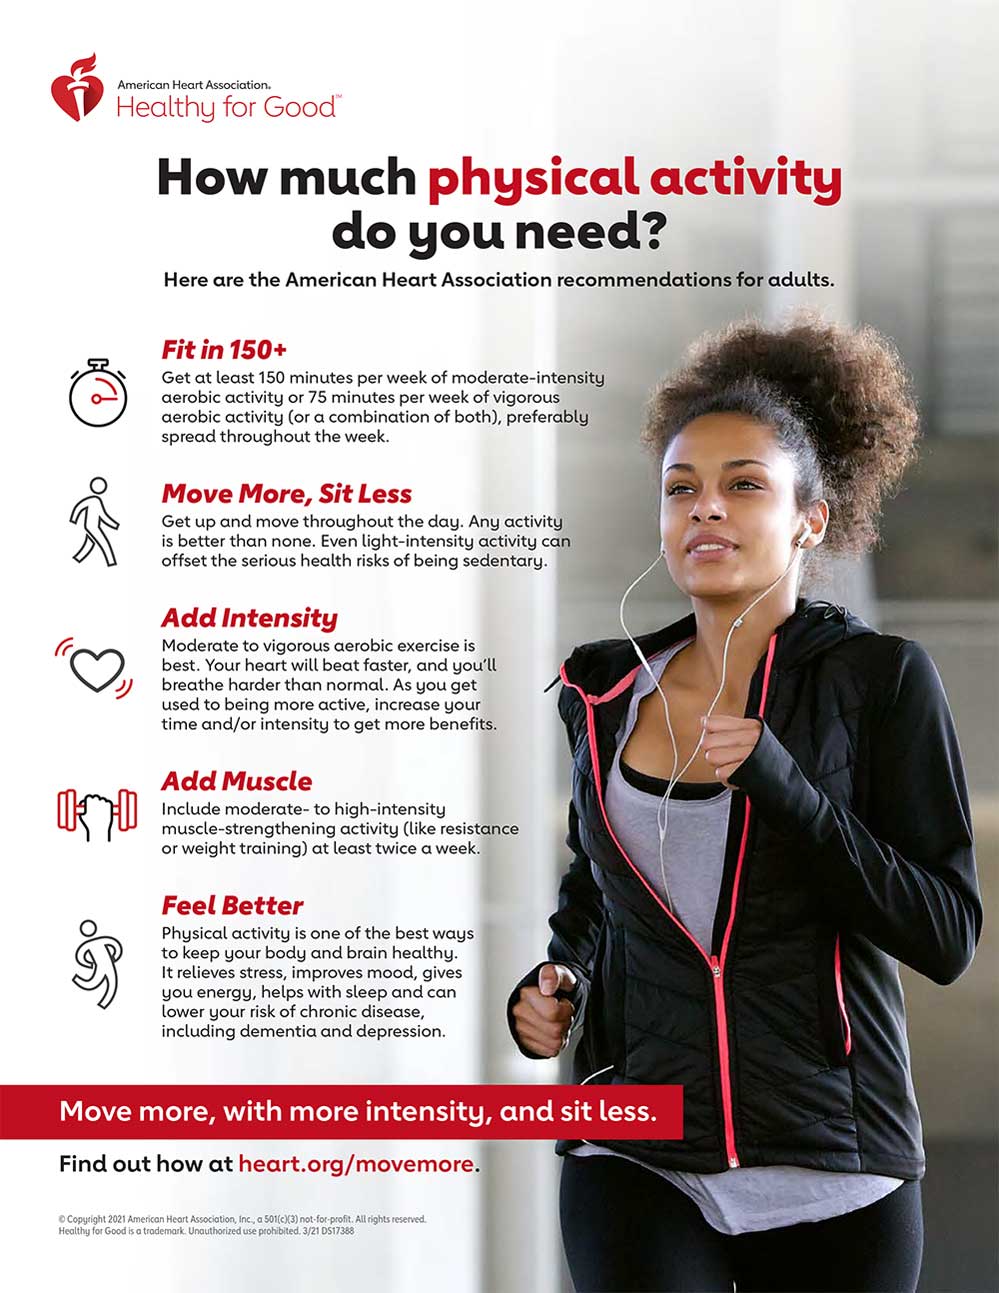 American Heart Association Recommendations For Physical Activity In Adults And Kids | American Heart Association